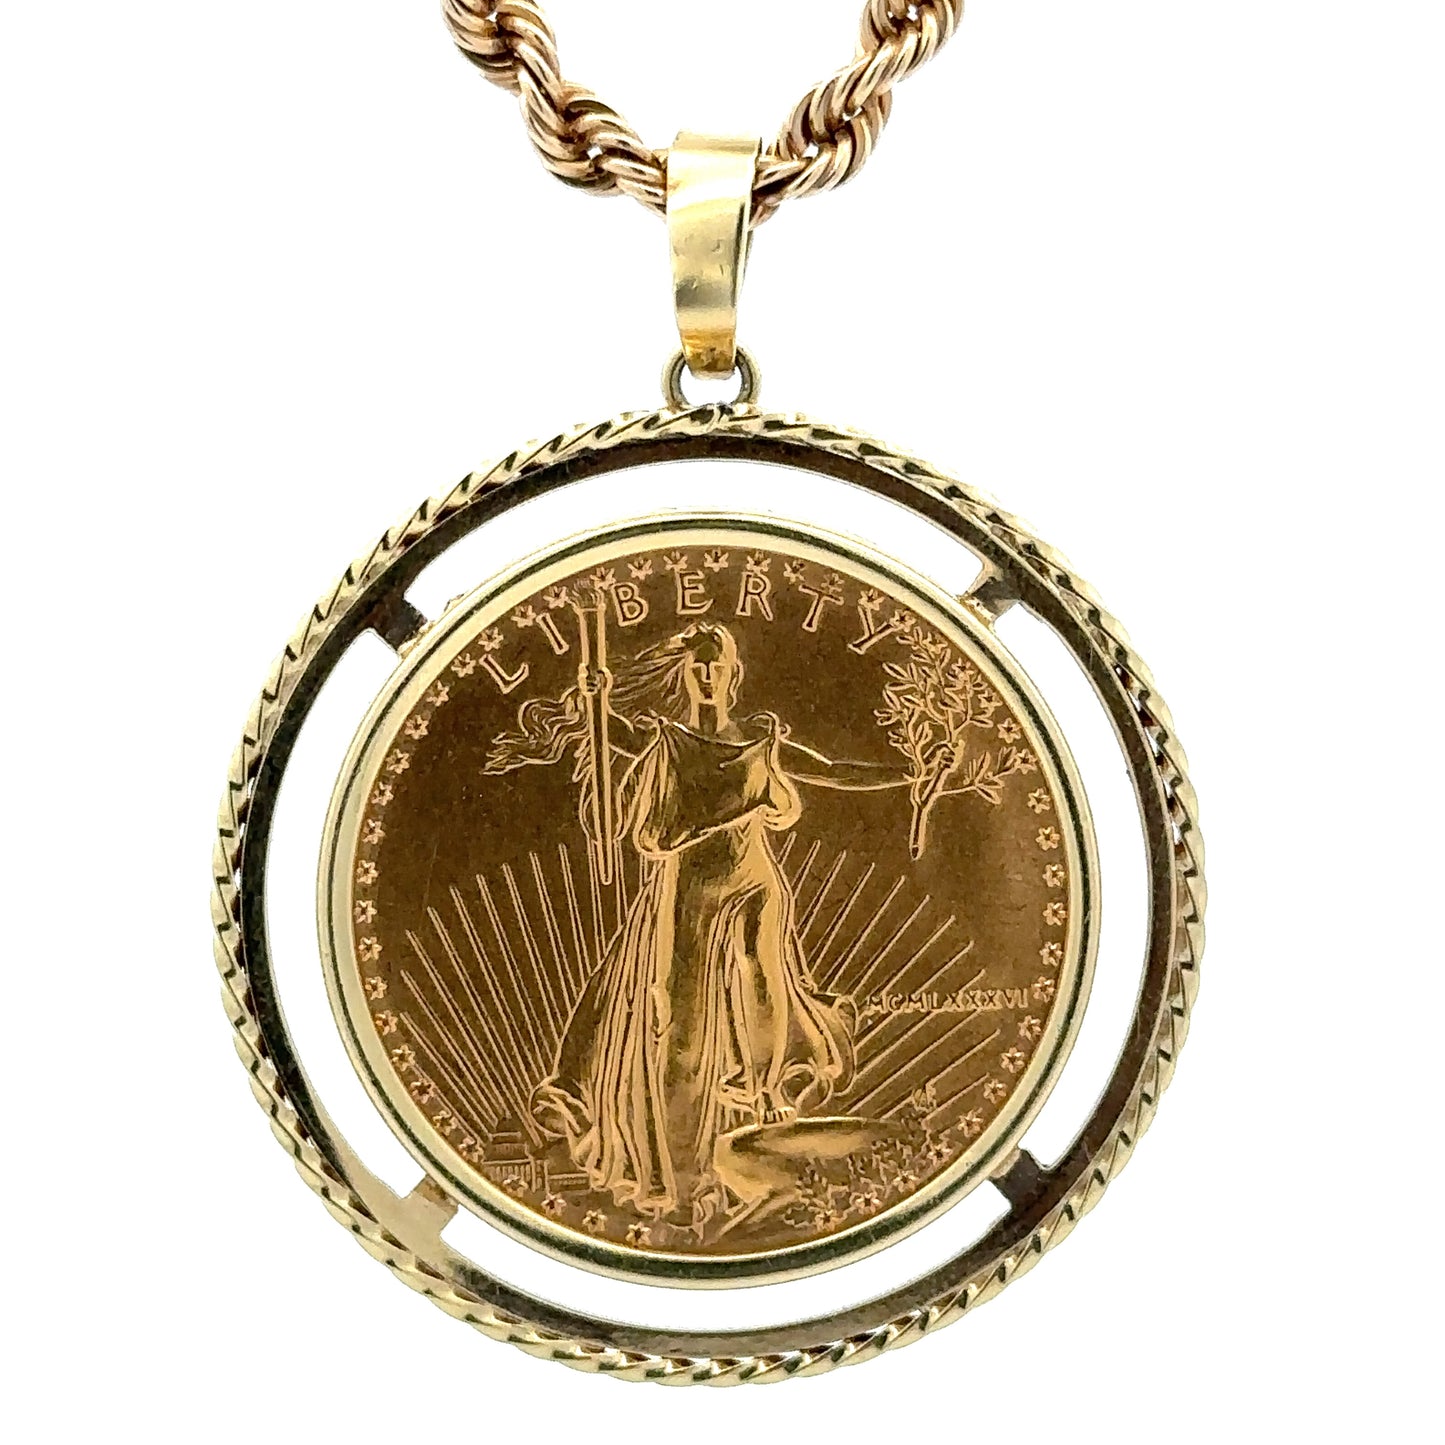 close up of coin pendant with 1986 in roman numerals